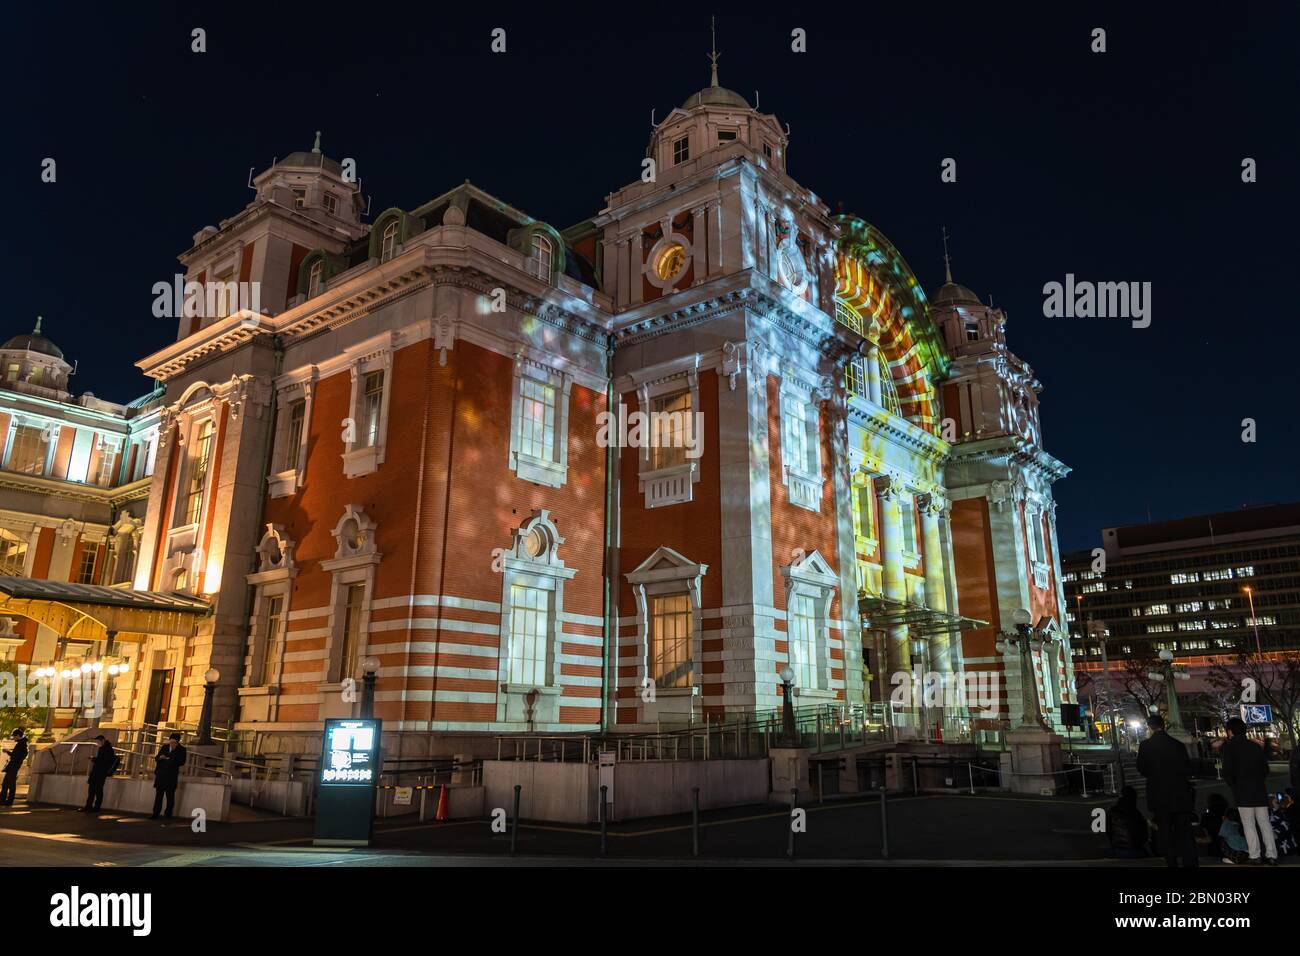 Festival of the Lights in Osaka. The winter illumination events, 3D projection mapping on Osaka City Central Public Hall Stock Photo